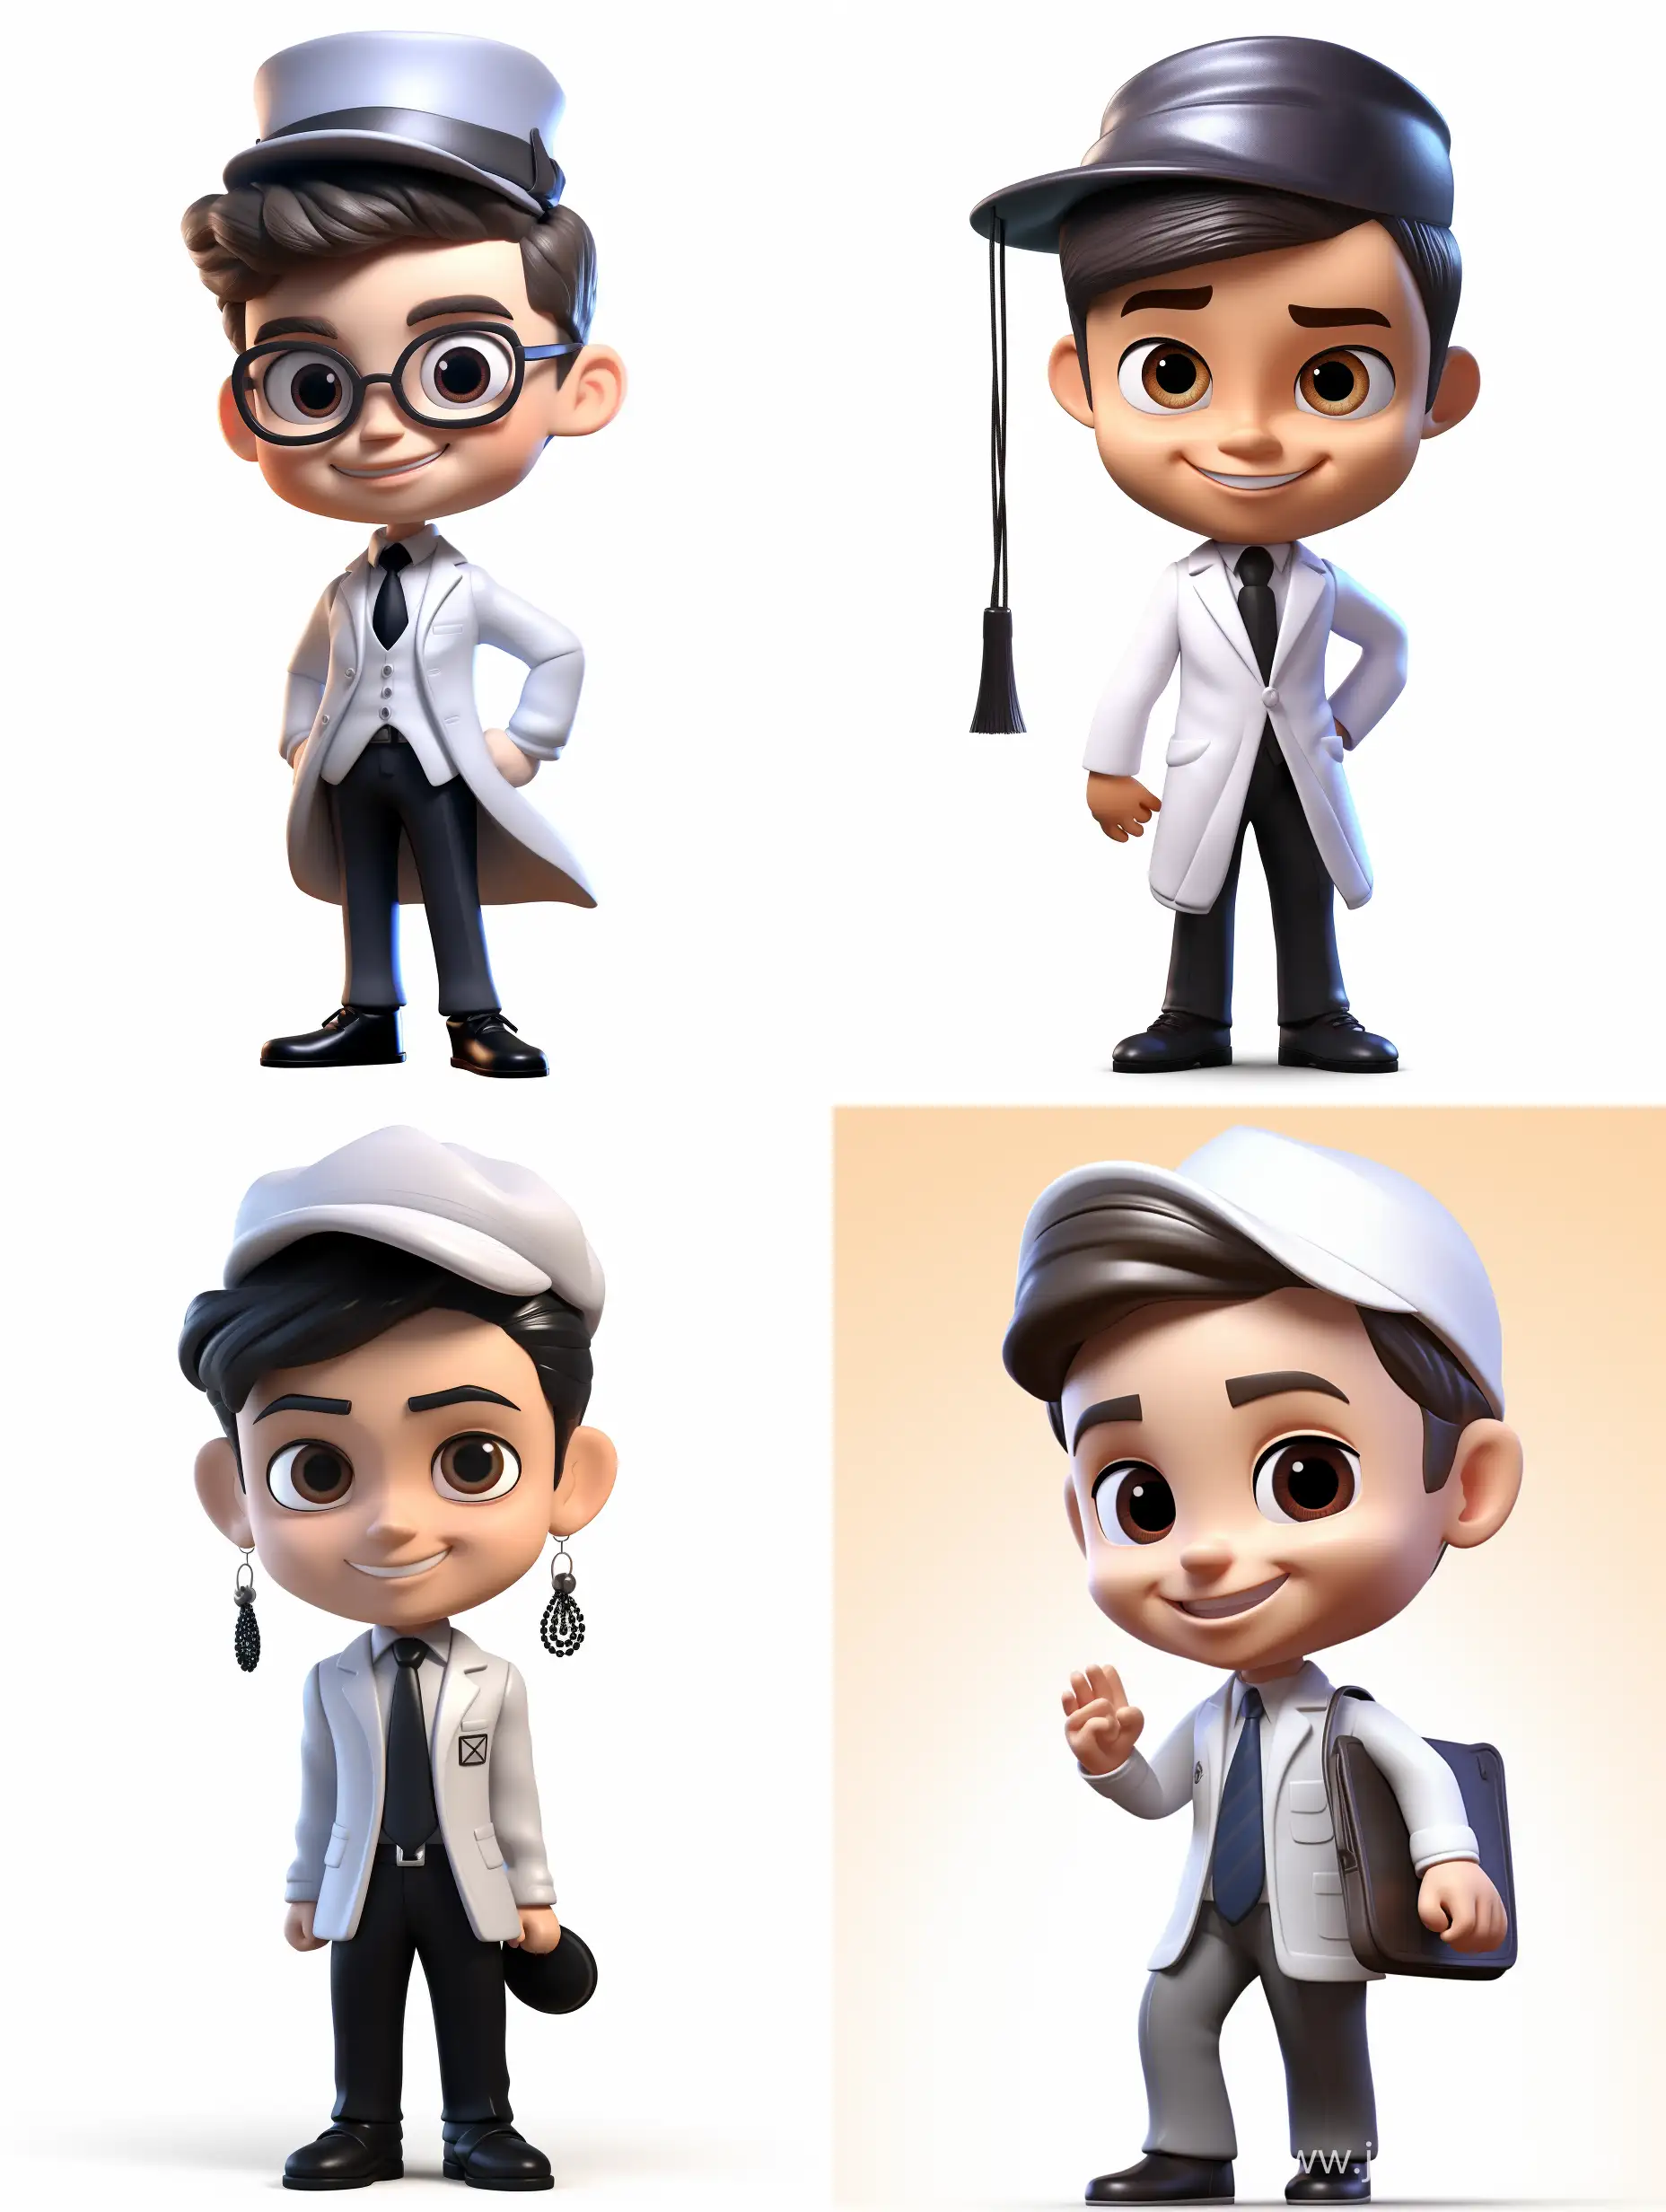 Smiling-Bachelors-Capwearing-Cute-Doctor-in-3D-Cartoon-Style